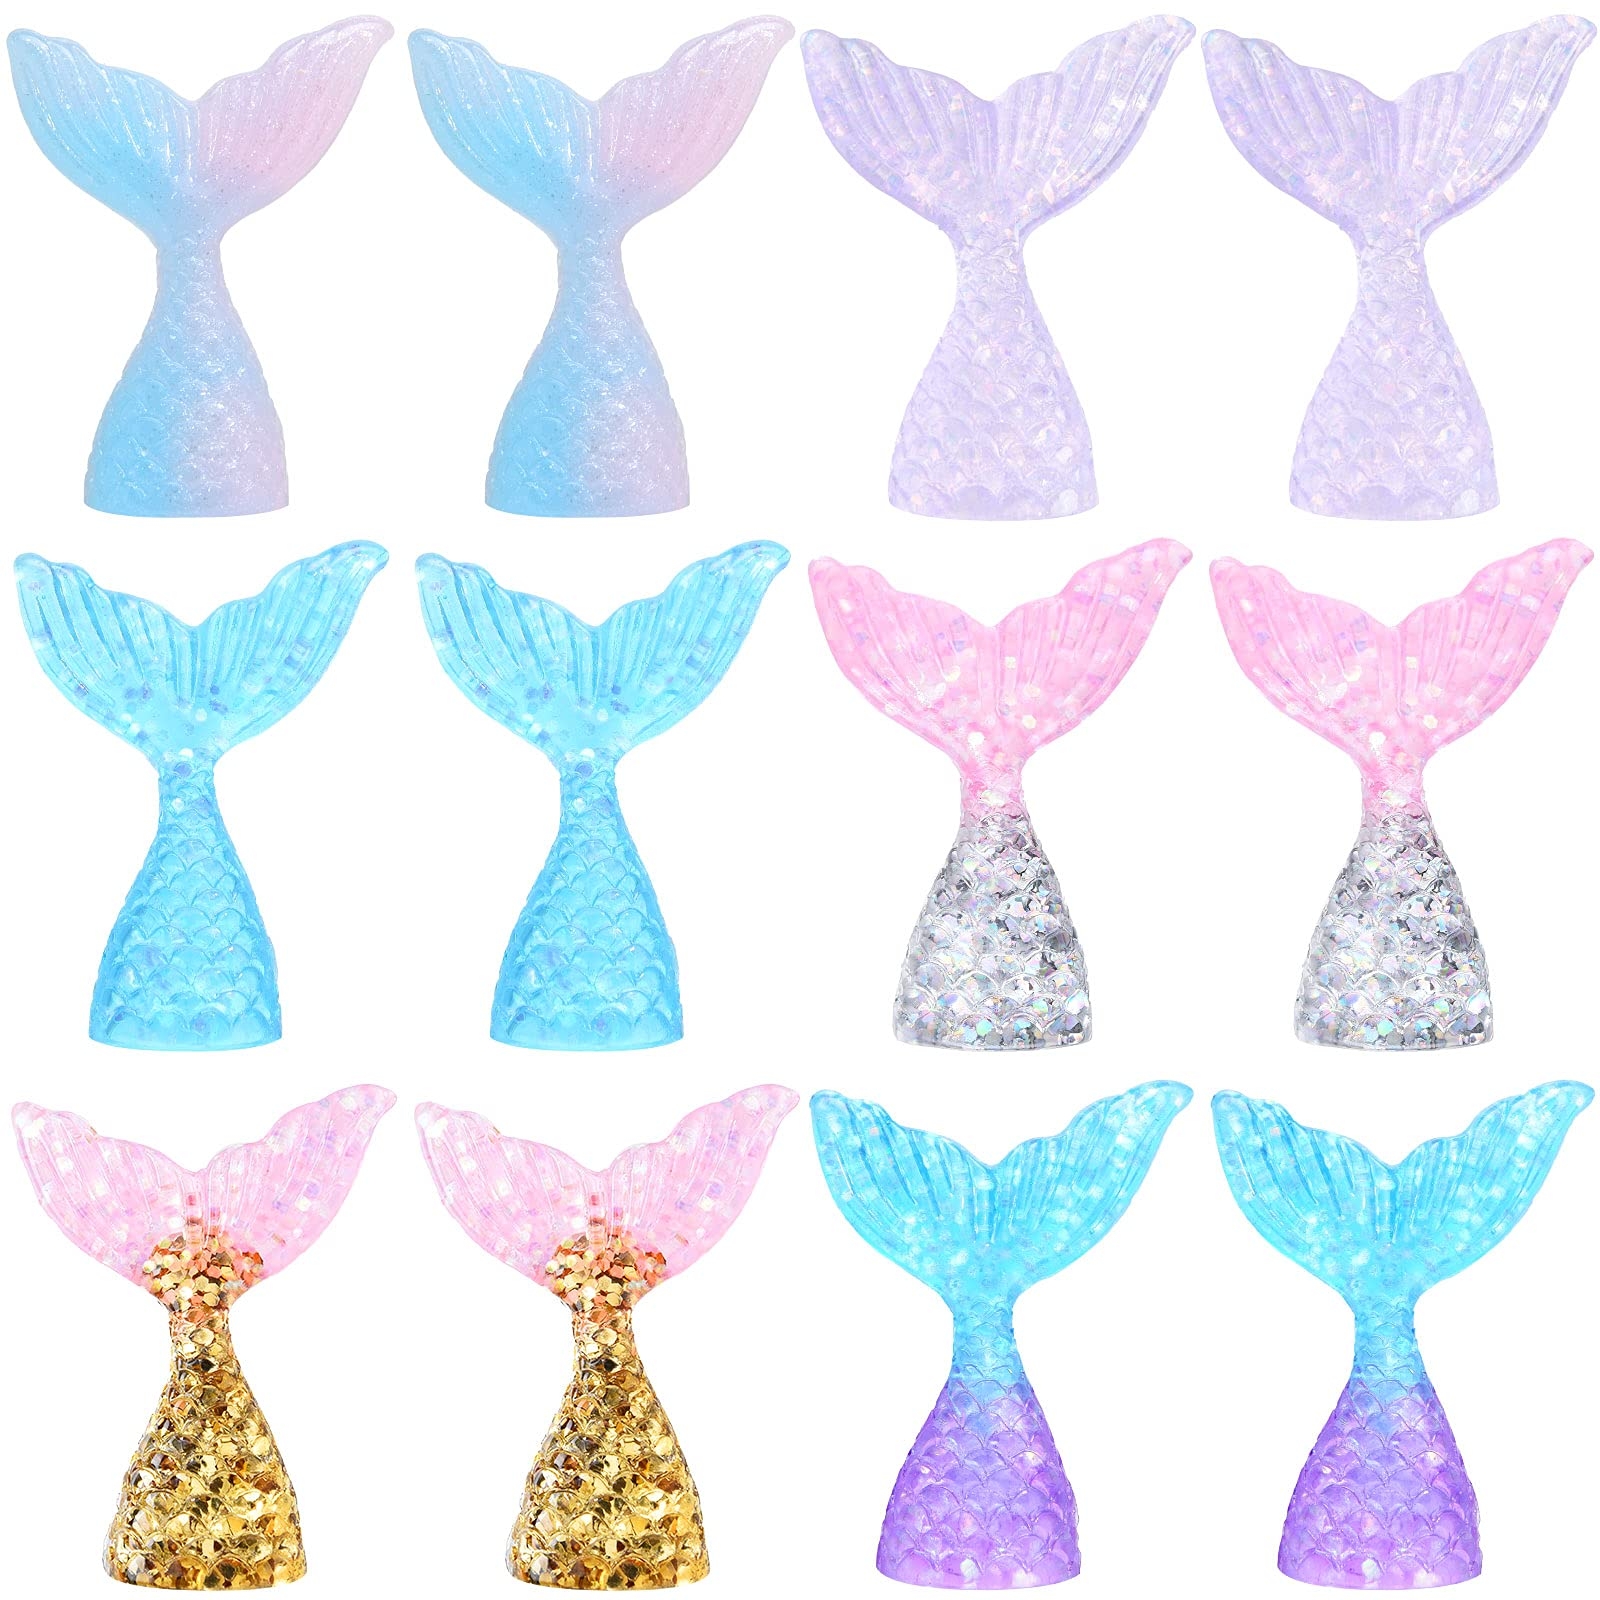 Amazon 36 Pieces Acrylic Mermaid Tails Cupcake Toppers Mini Wrappers Mermaid Tail Figurines Cake Decorations For Mermaid Party Birthday Party Baby Shower Party Supplies Favors Toys Games